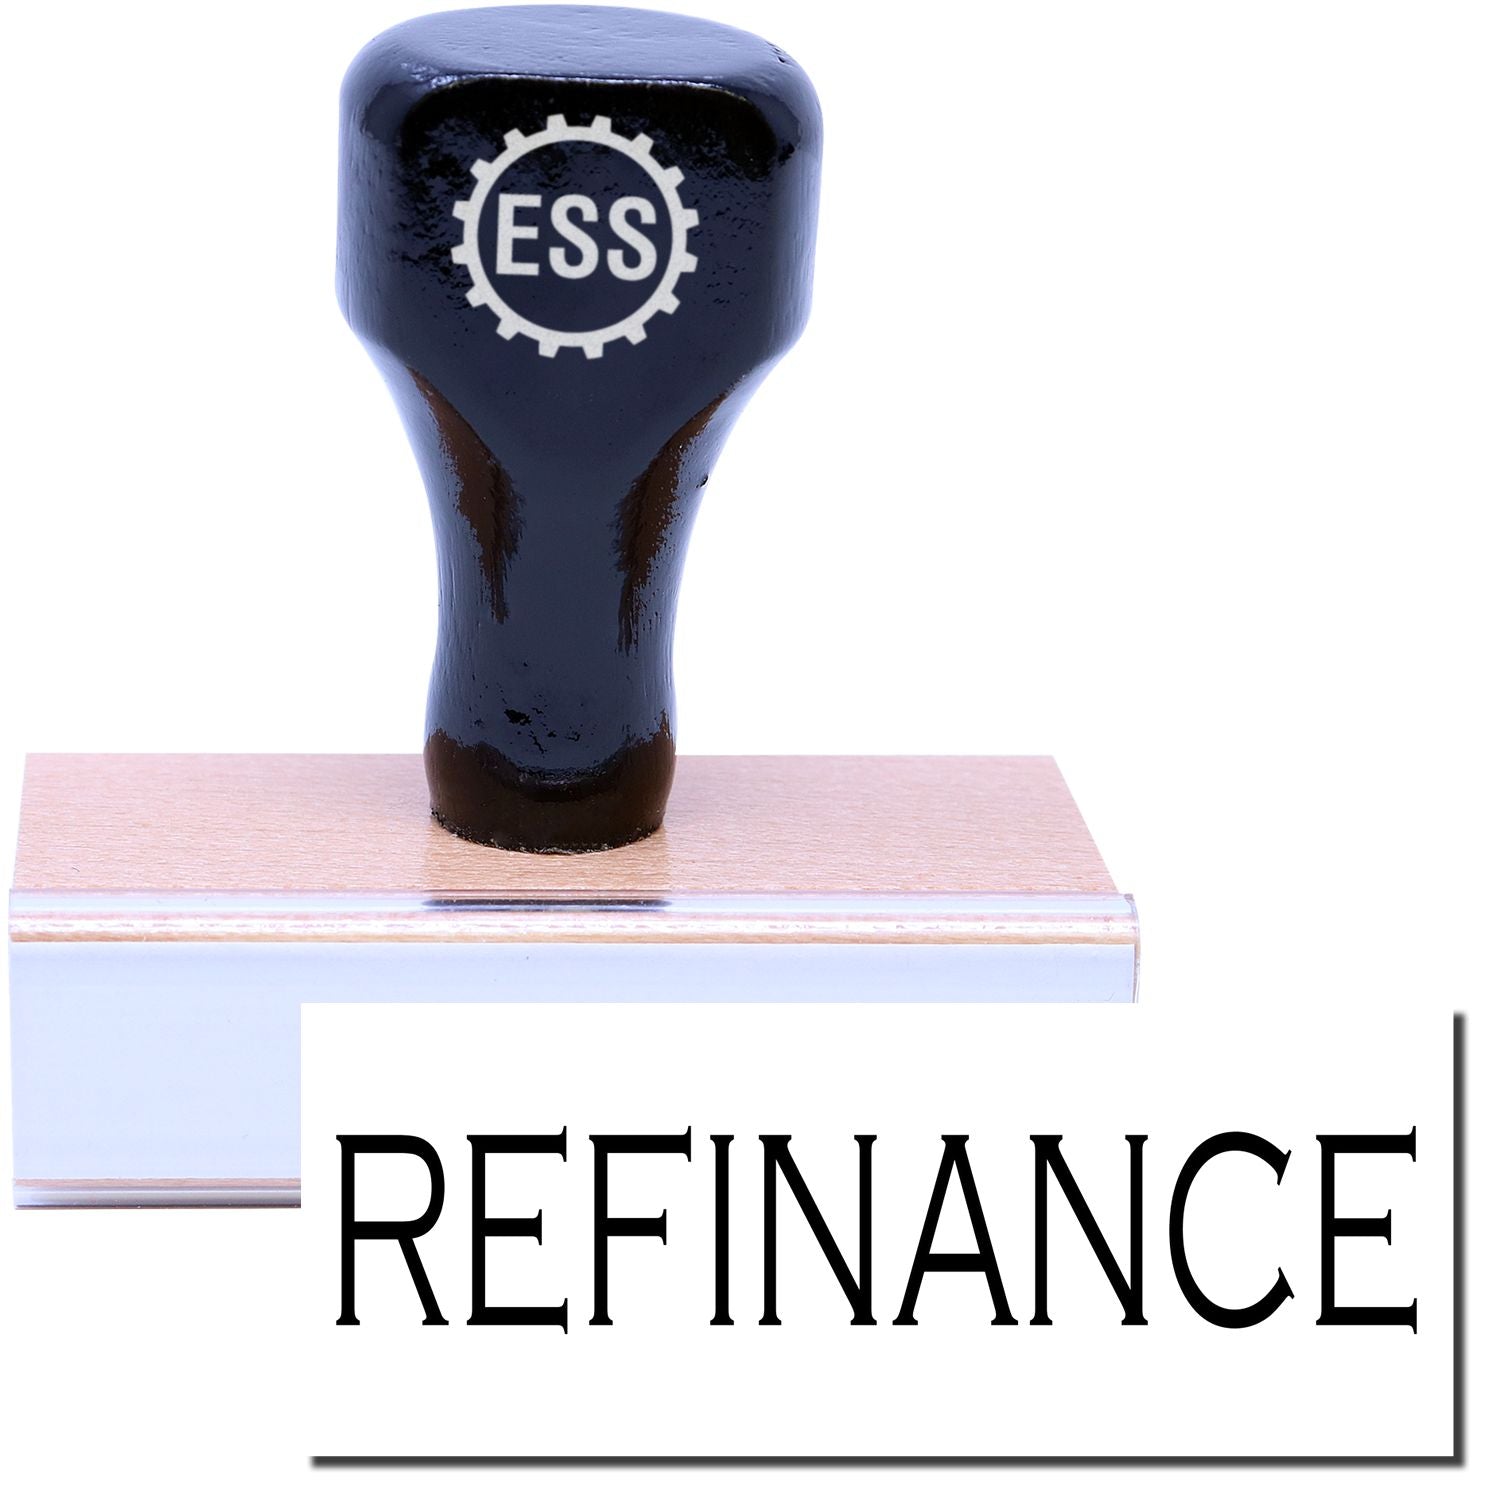 A stock office rubber stamp with a stamped image showing how the text "REFINANCE" in a large font is displayed after stamping.